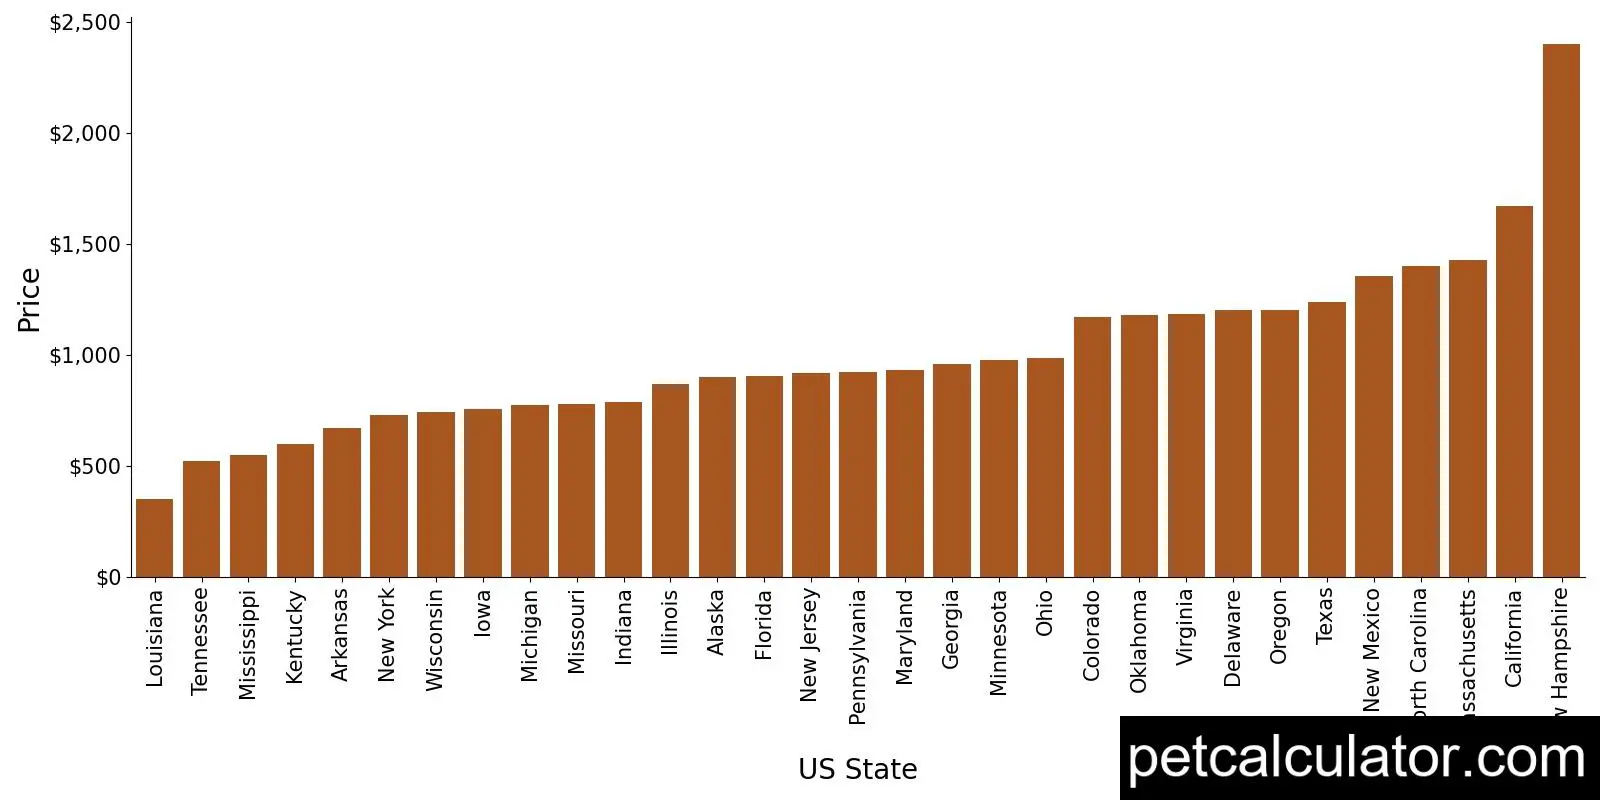 Price of Jack Russell Terrier by US State 